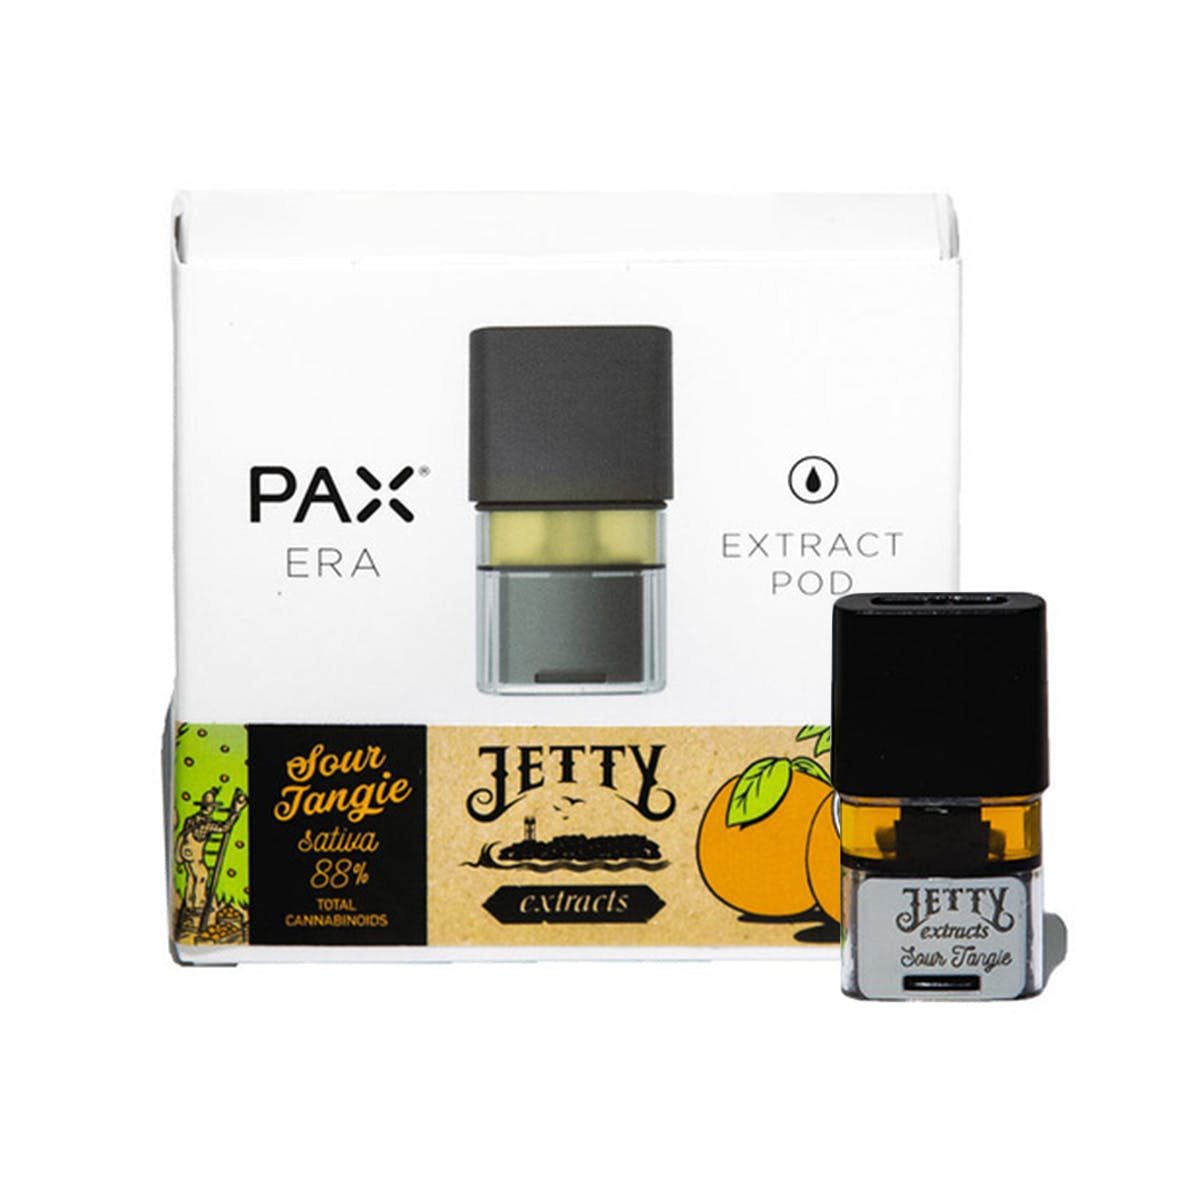 PAX Era Pod - Jetty Extracts Sour Tangie